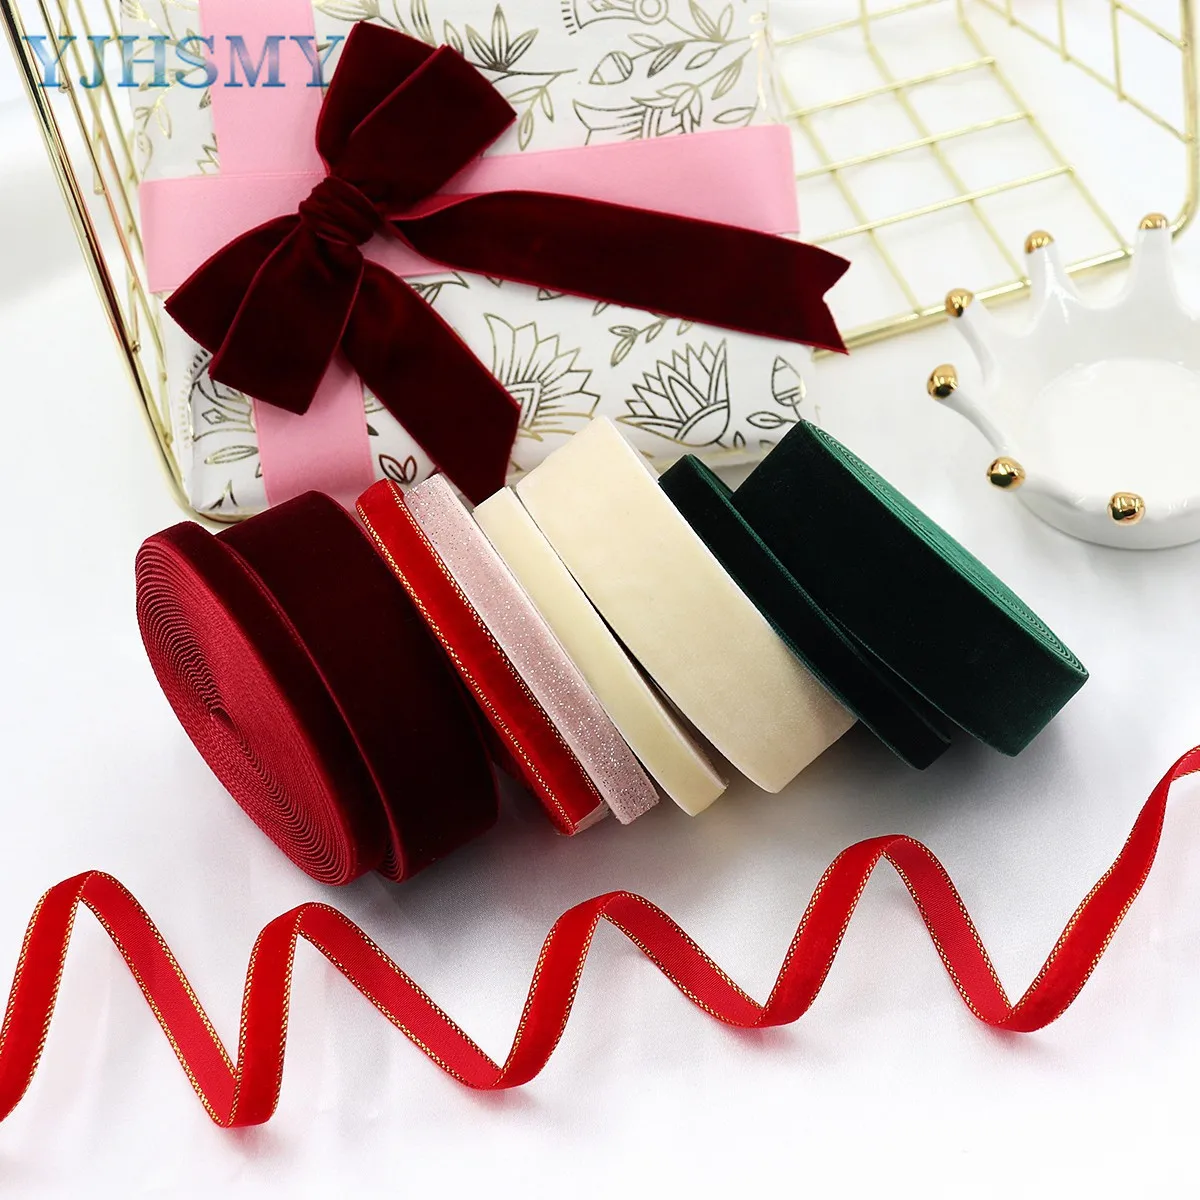 3/8” Velvet Ribbon For DIY Sewing, Crafting, Gift Wrapping